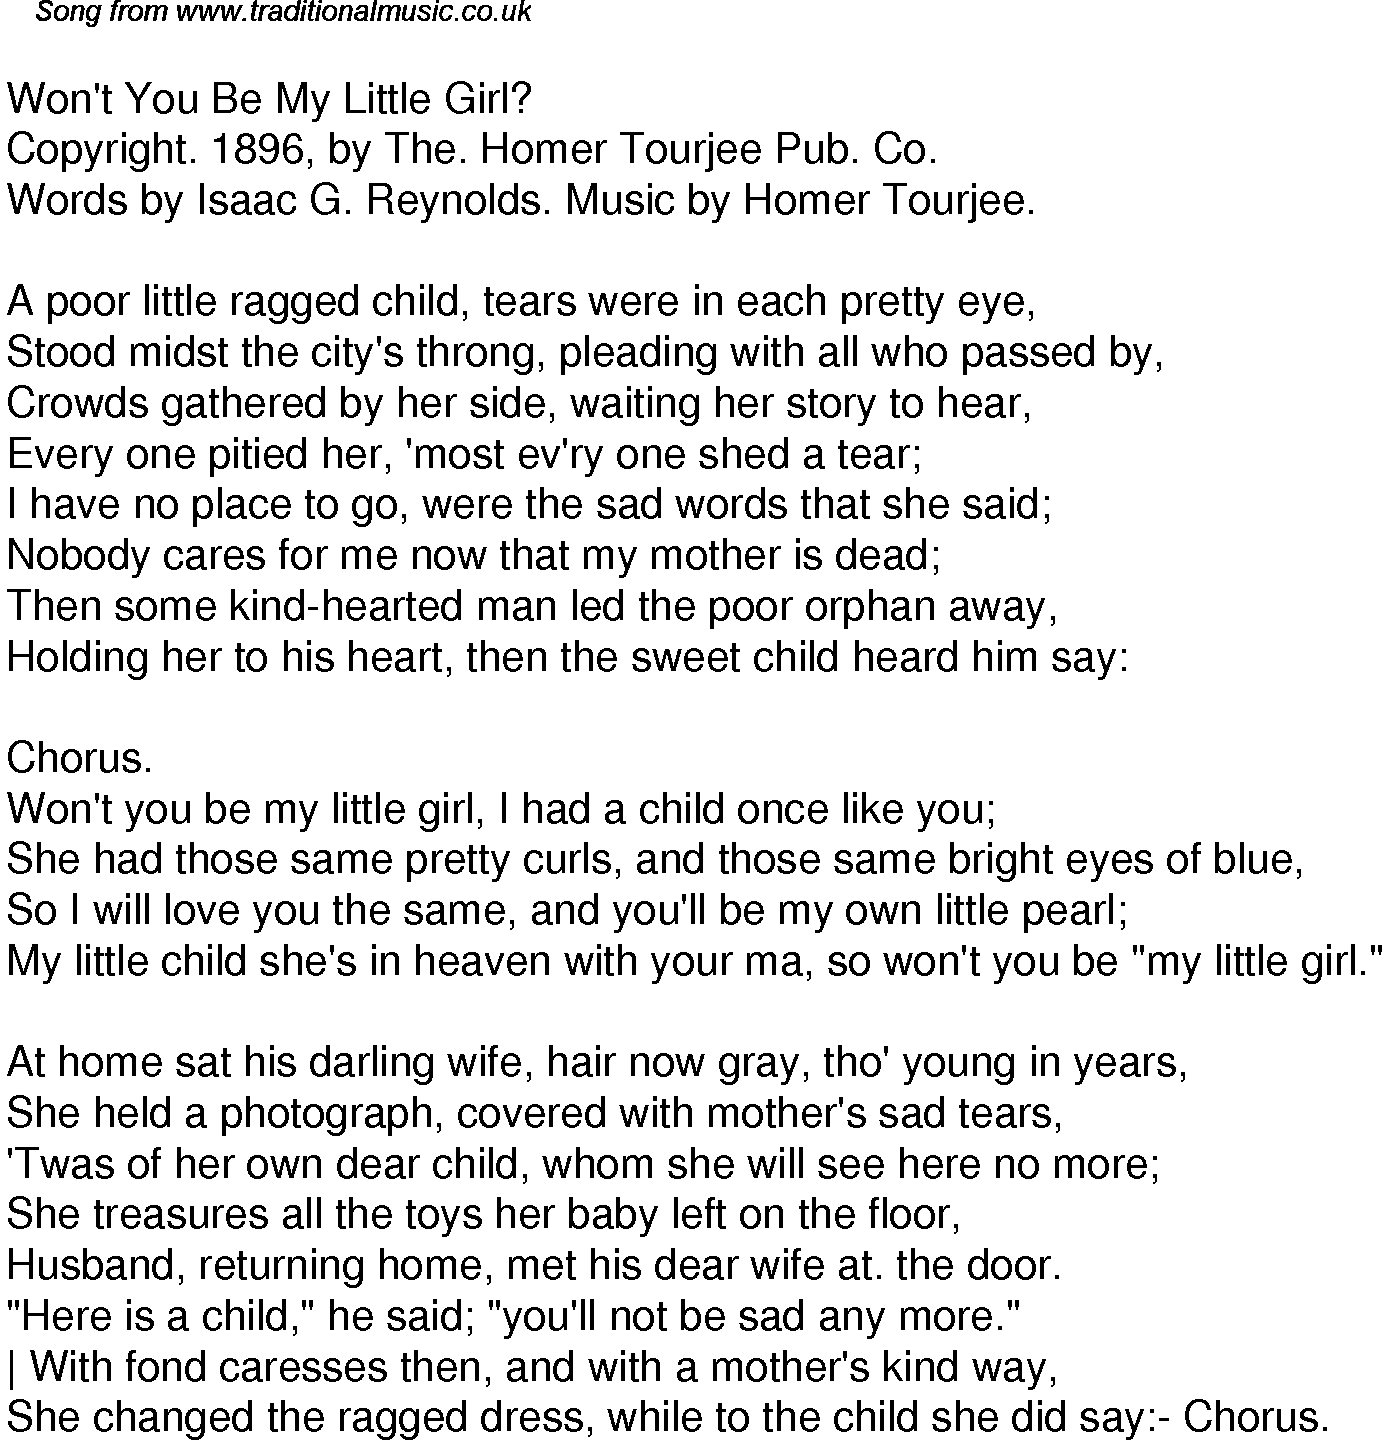 Old Time Song Lyrics for 54 Wont You Be My Little Girl